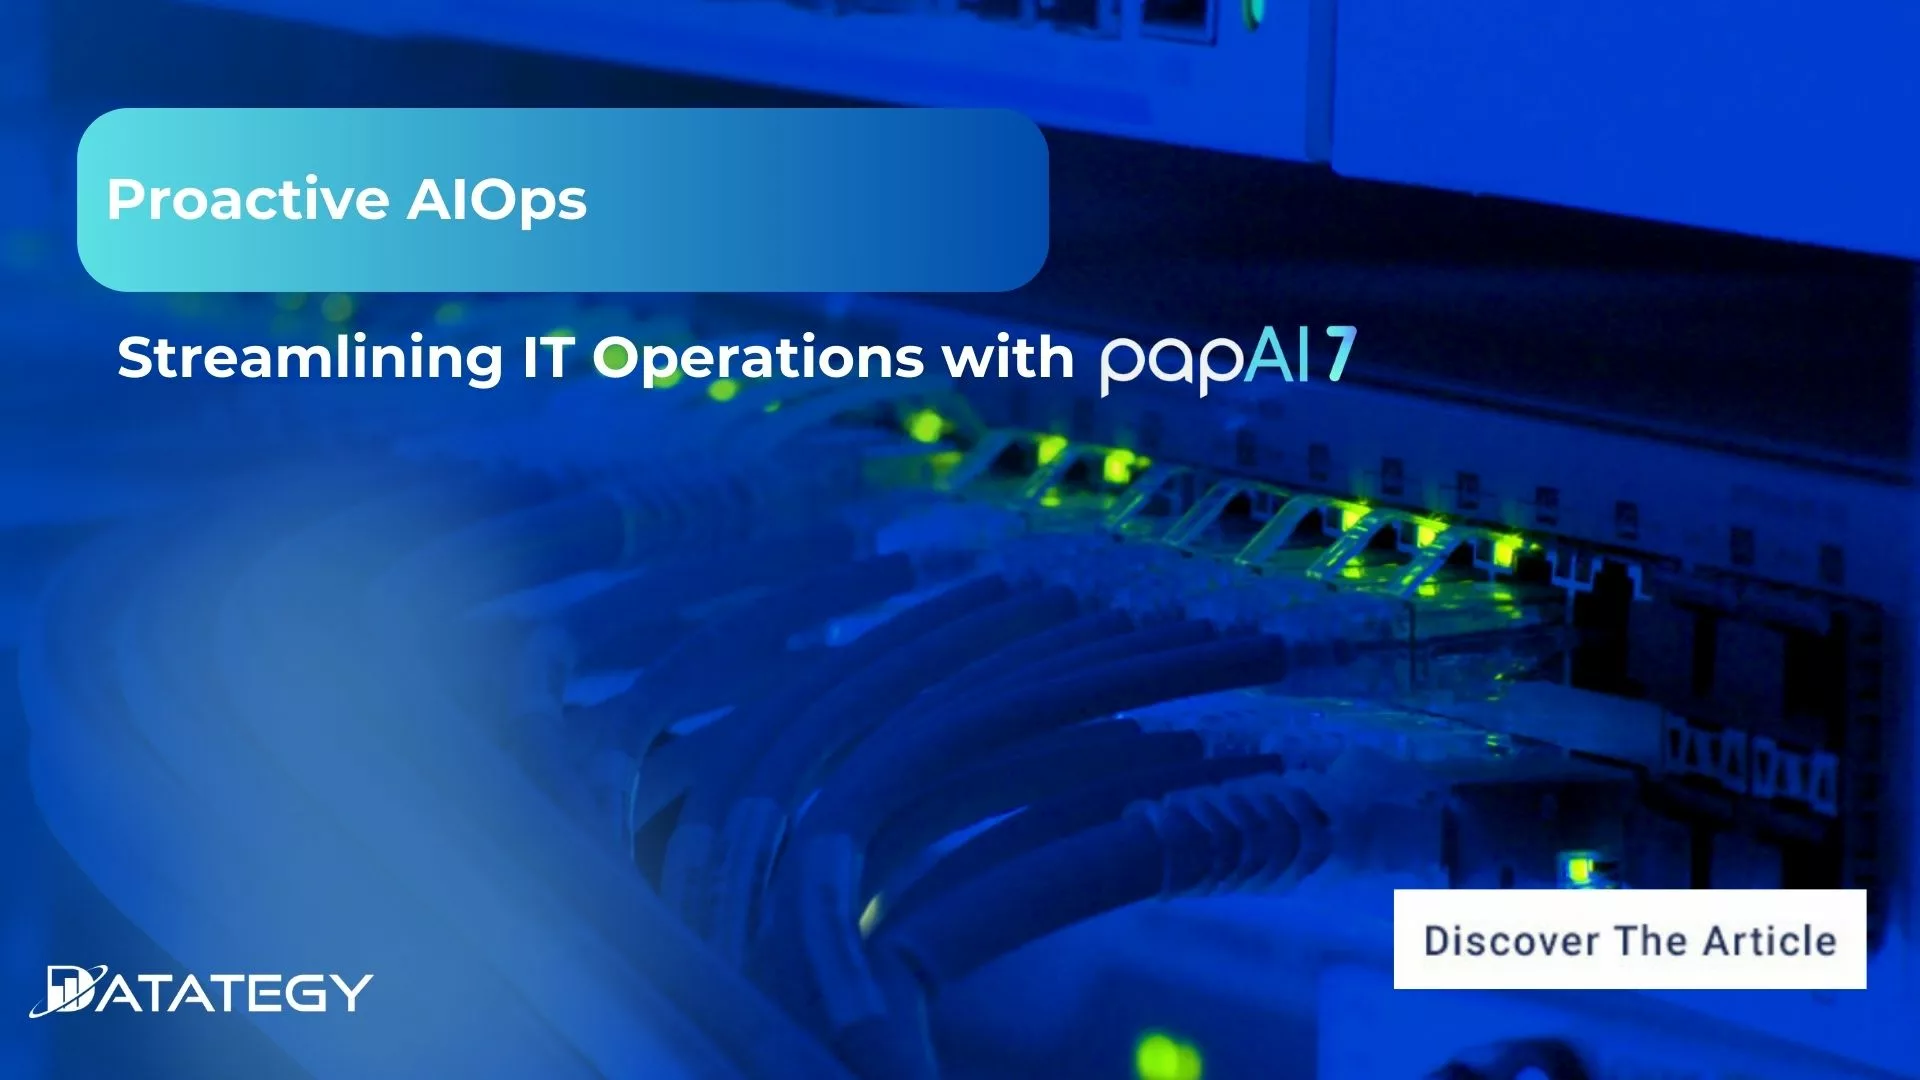 Proactive AIOps: Streamlining IT Operations with papAI 7